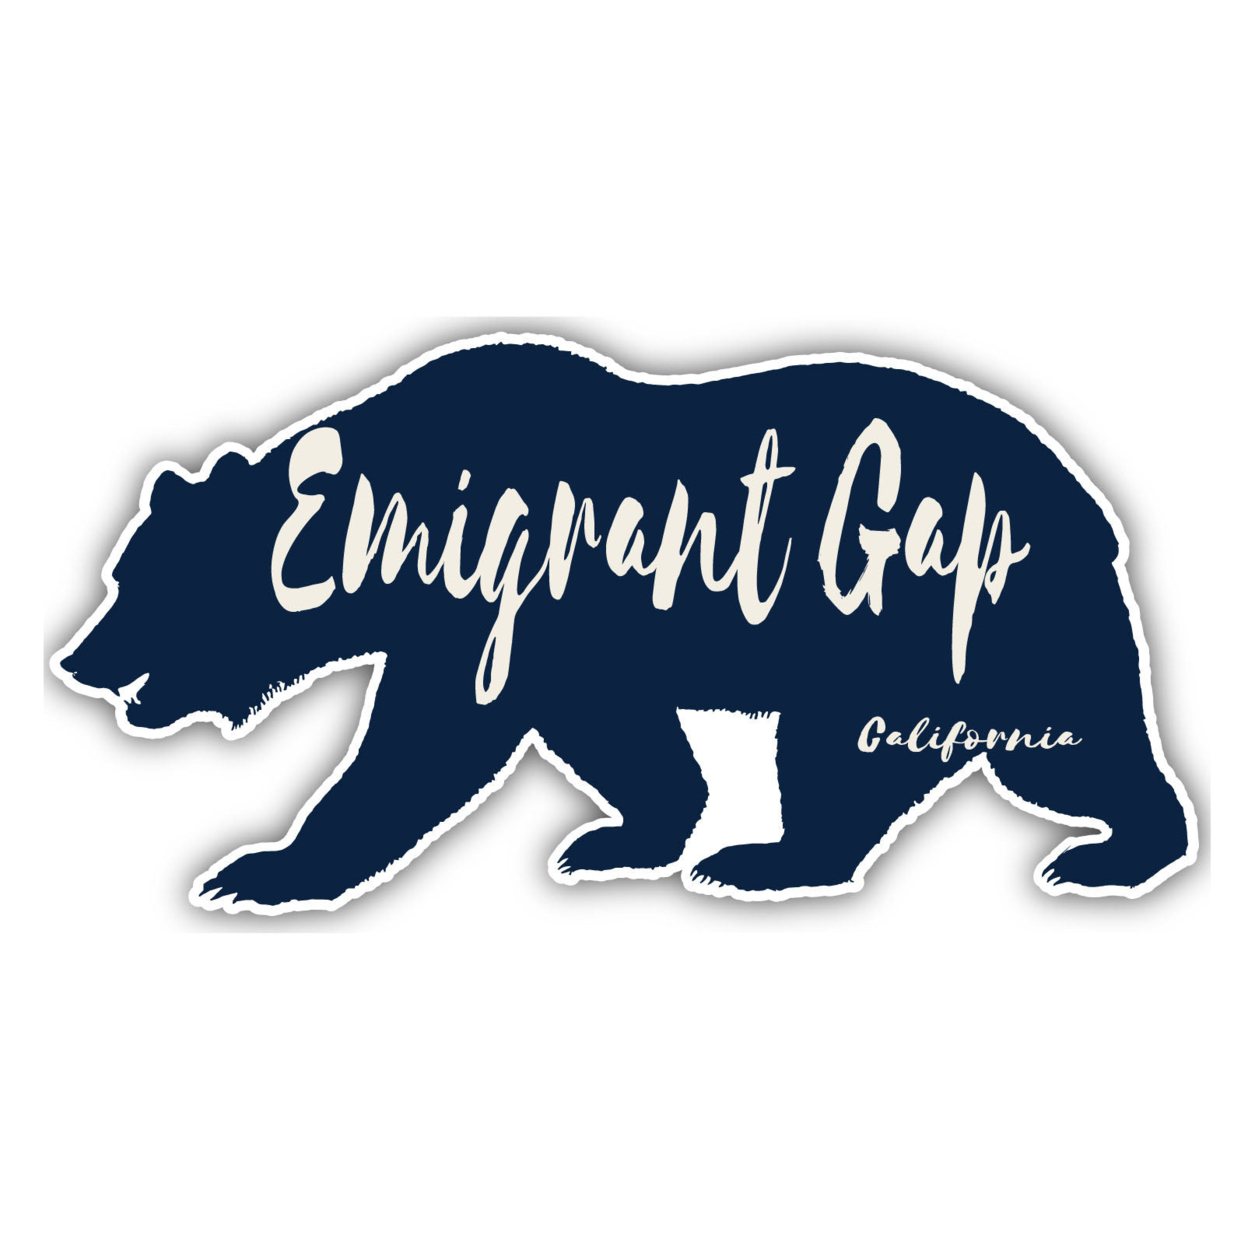 Emigrant Gap California Souvenir Decorative Stickers (Choose Theme And Size) - Single Unit, 2-Inch, Great Outdoors